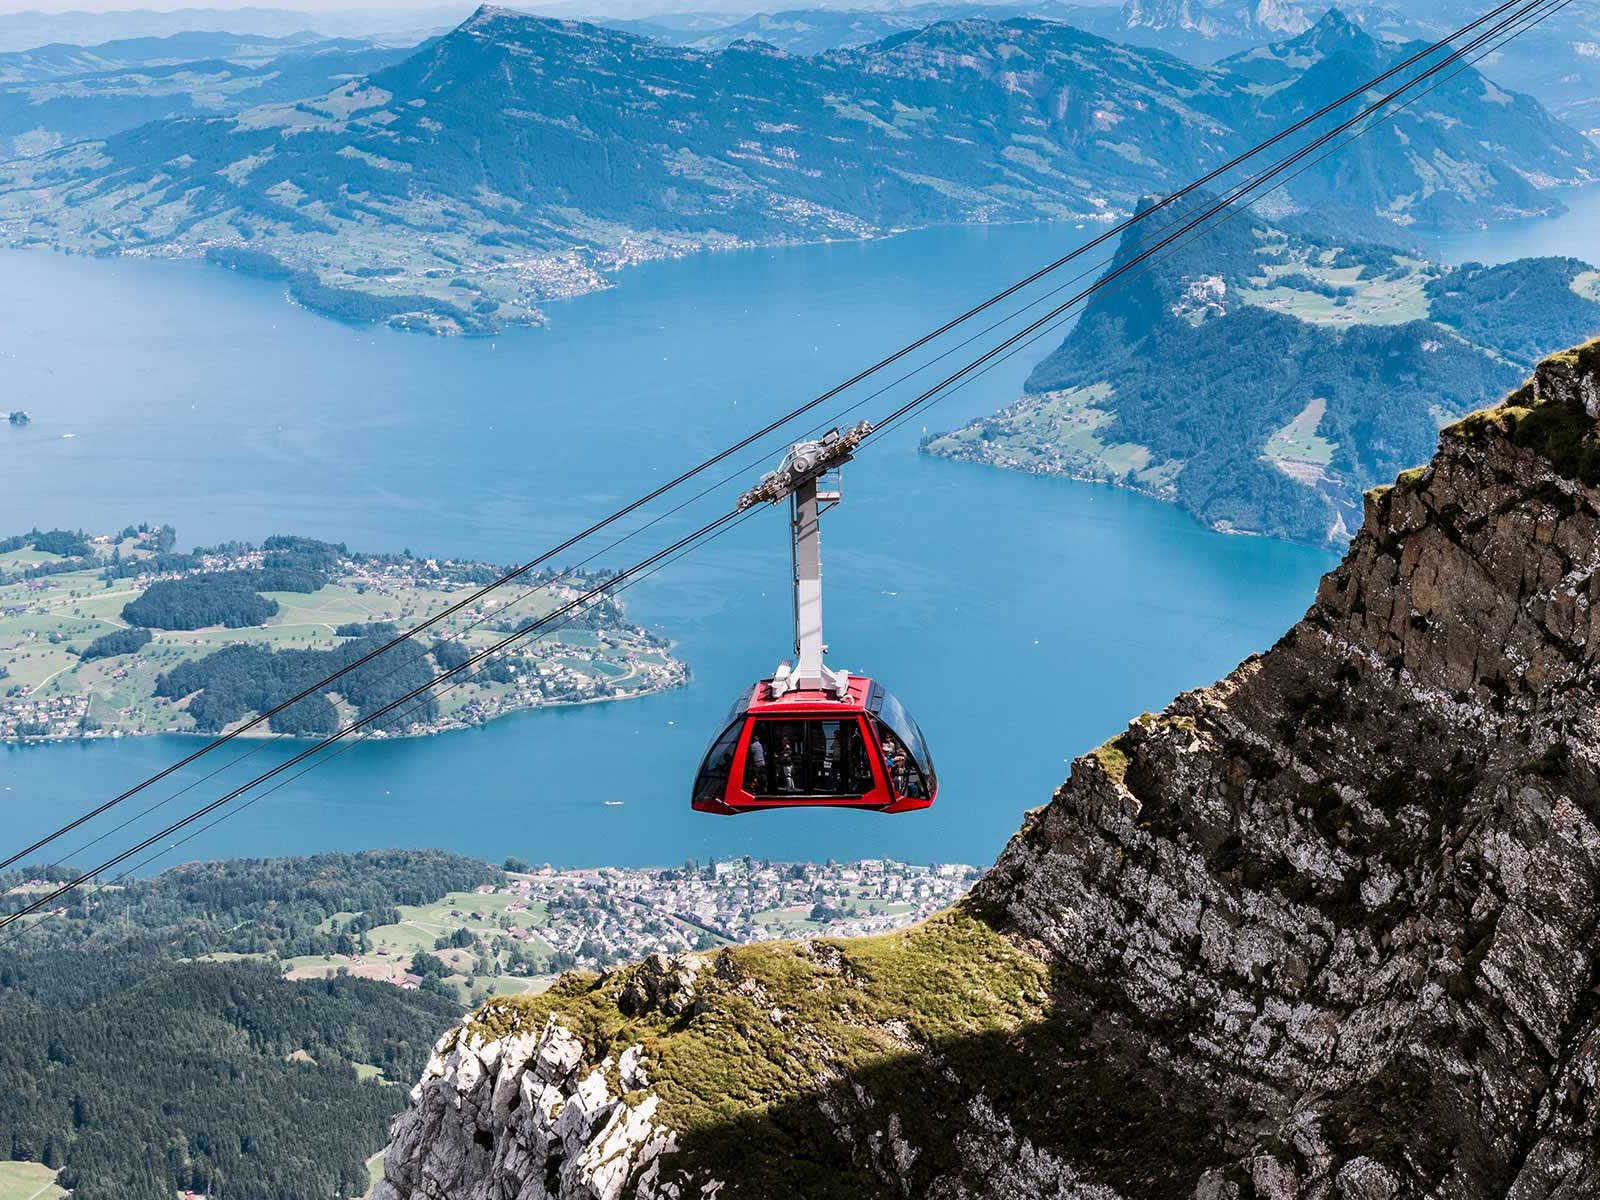 The Dragon Ride&nbsp;cable car takes guests up to Pilatus Kulm at 2,132 metres above sea level.